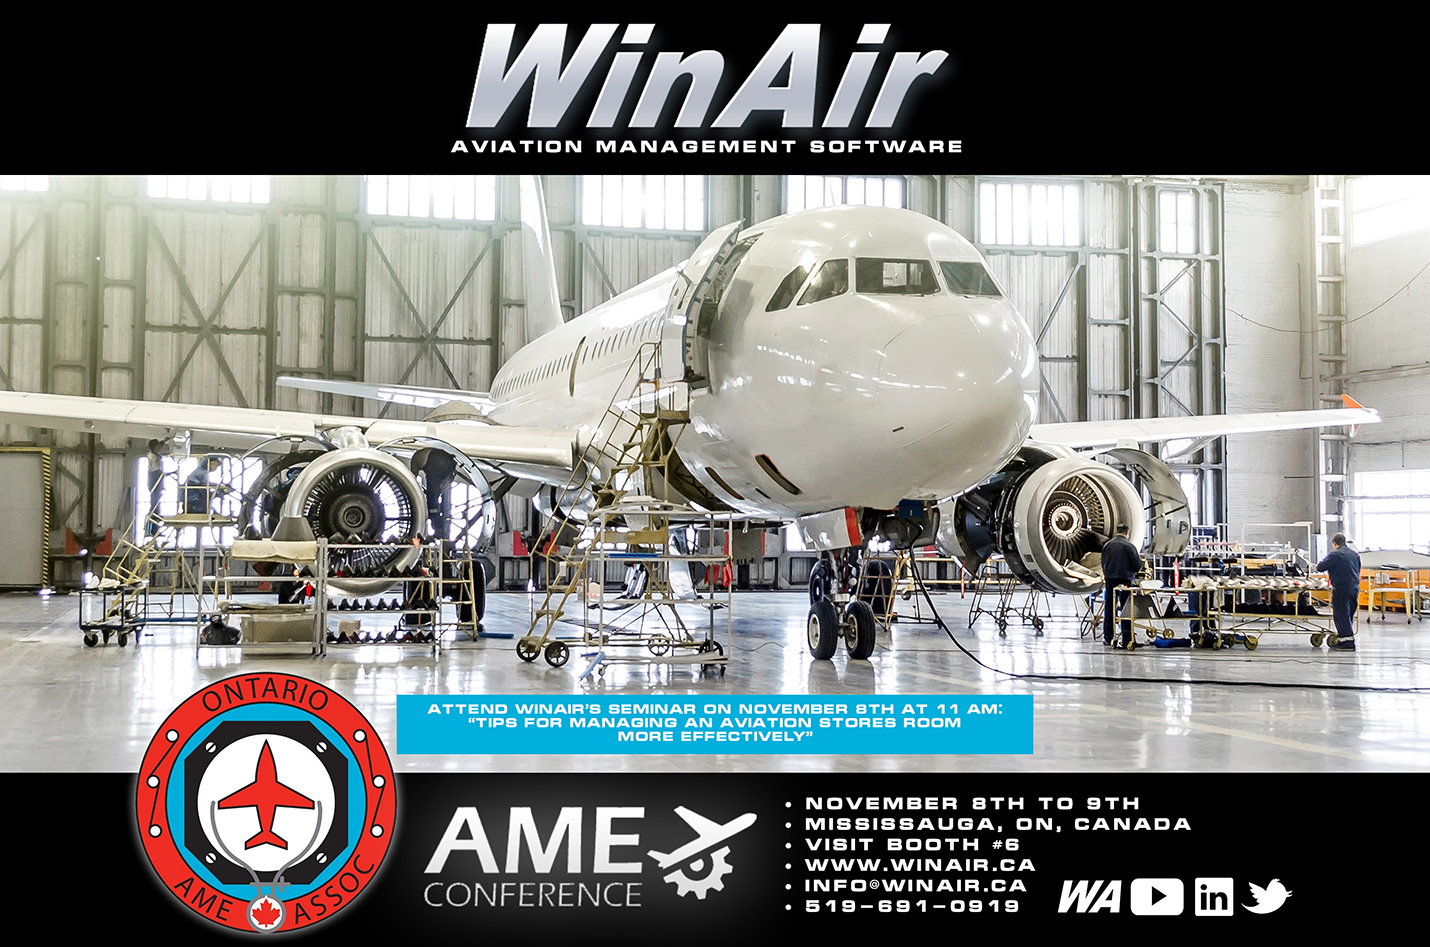 WinAir - Aviation Management Software - Ontario AME Conference - Visit Booth 6 - Promotional Event Image